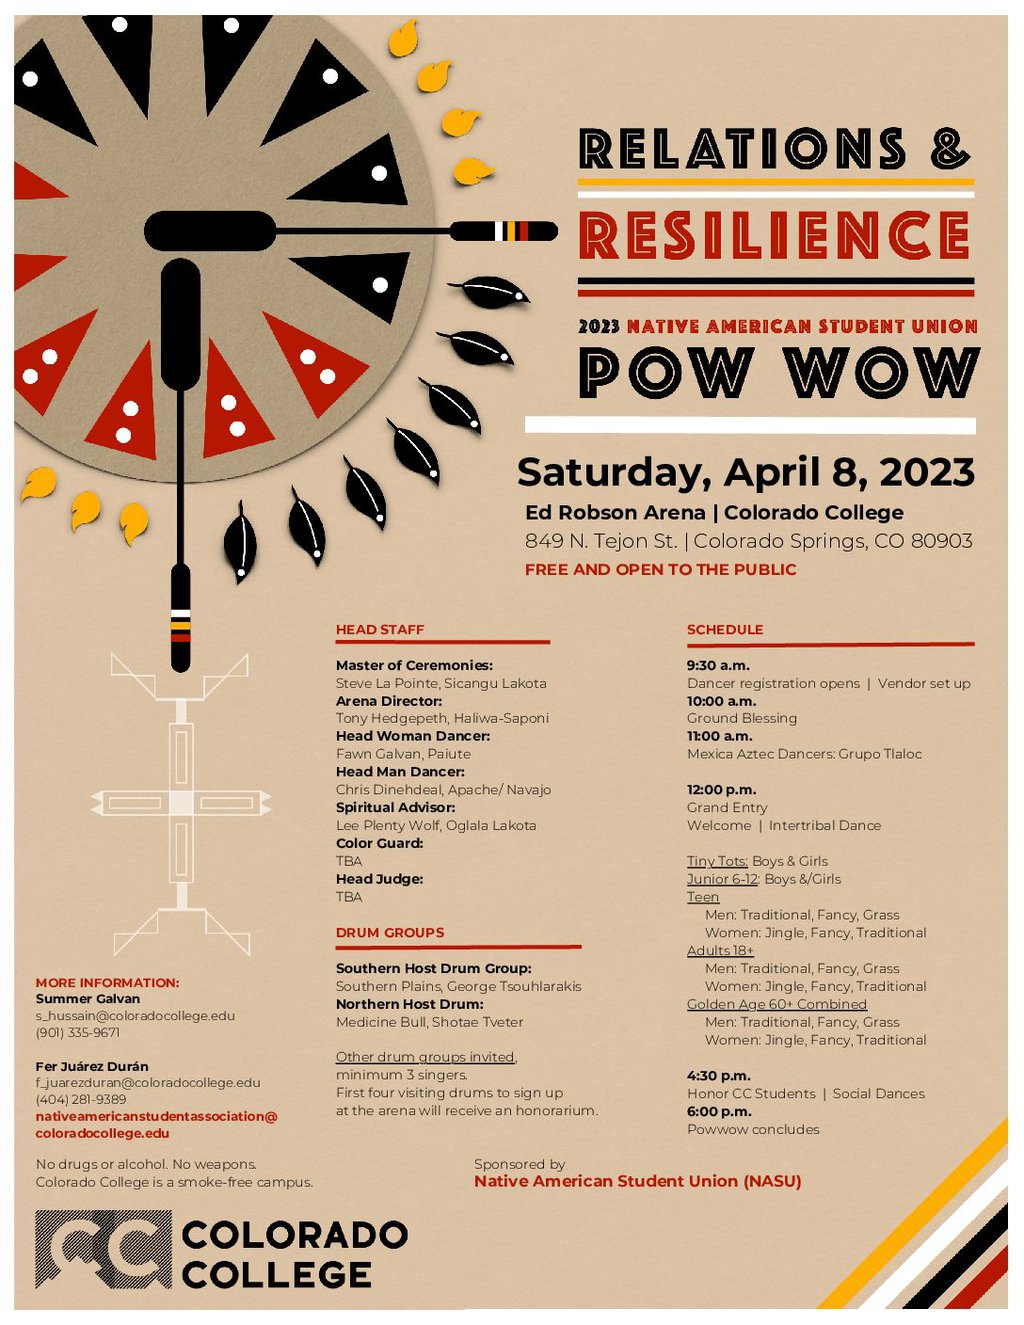 Relations & Resilience Pow Wow 2023